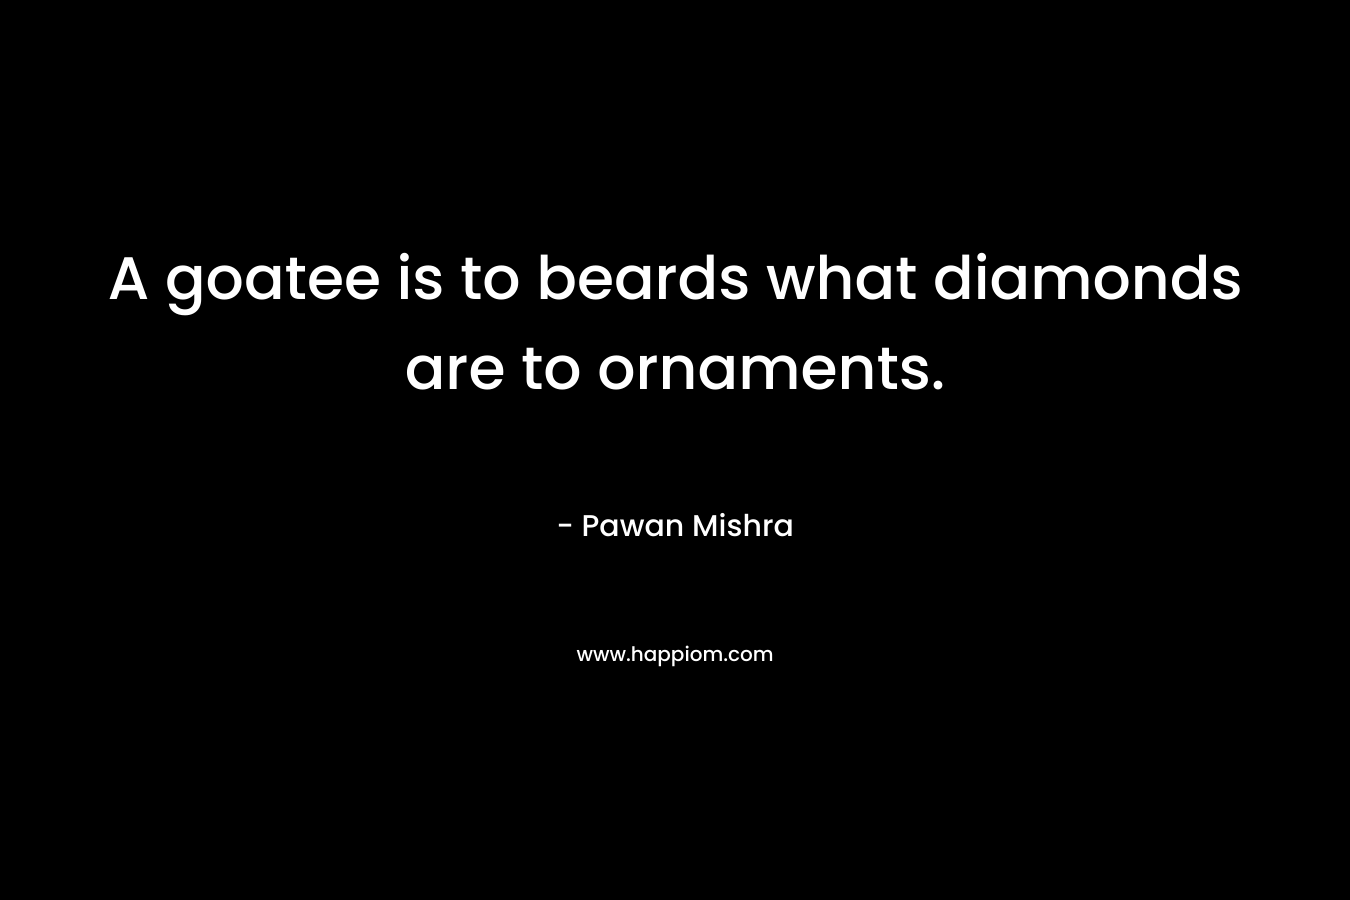 A goatee is to beards what diamonds are to ornaments. – Pawan Mishra